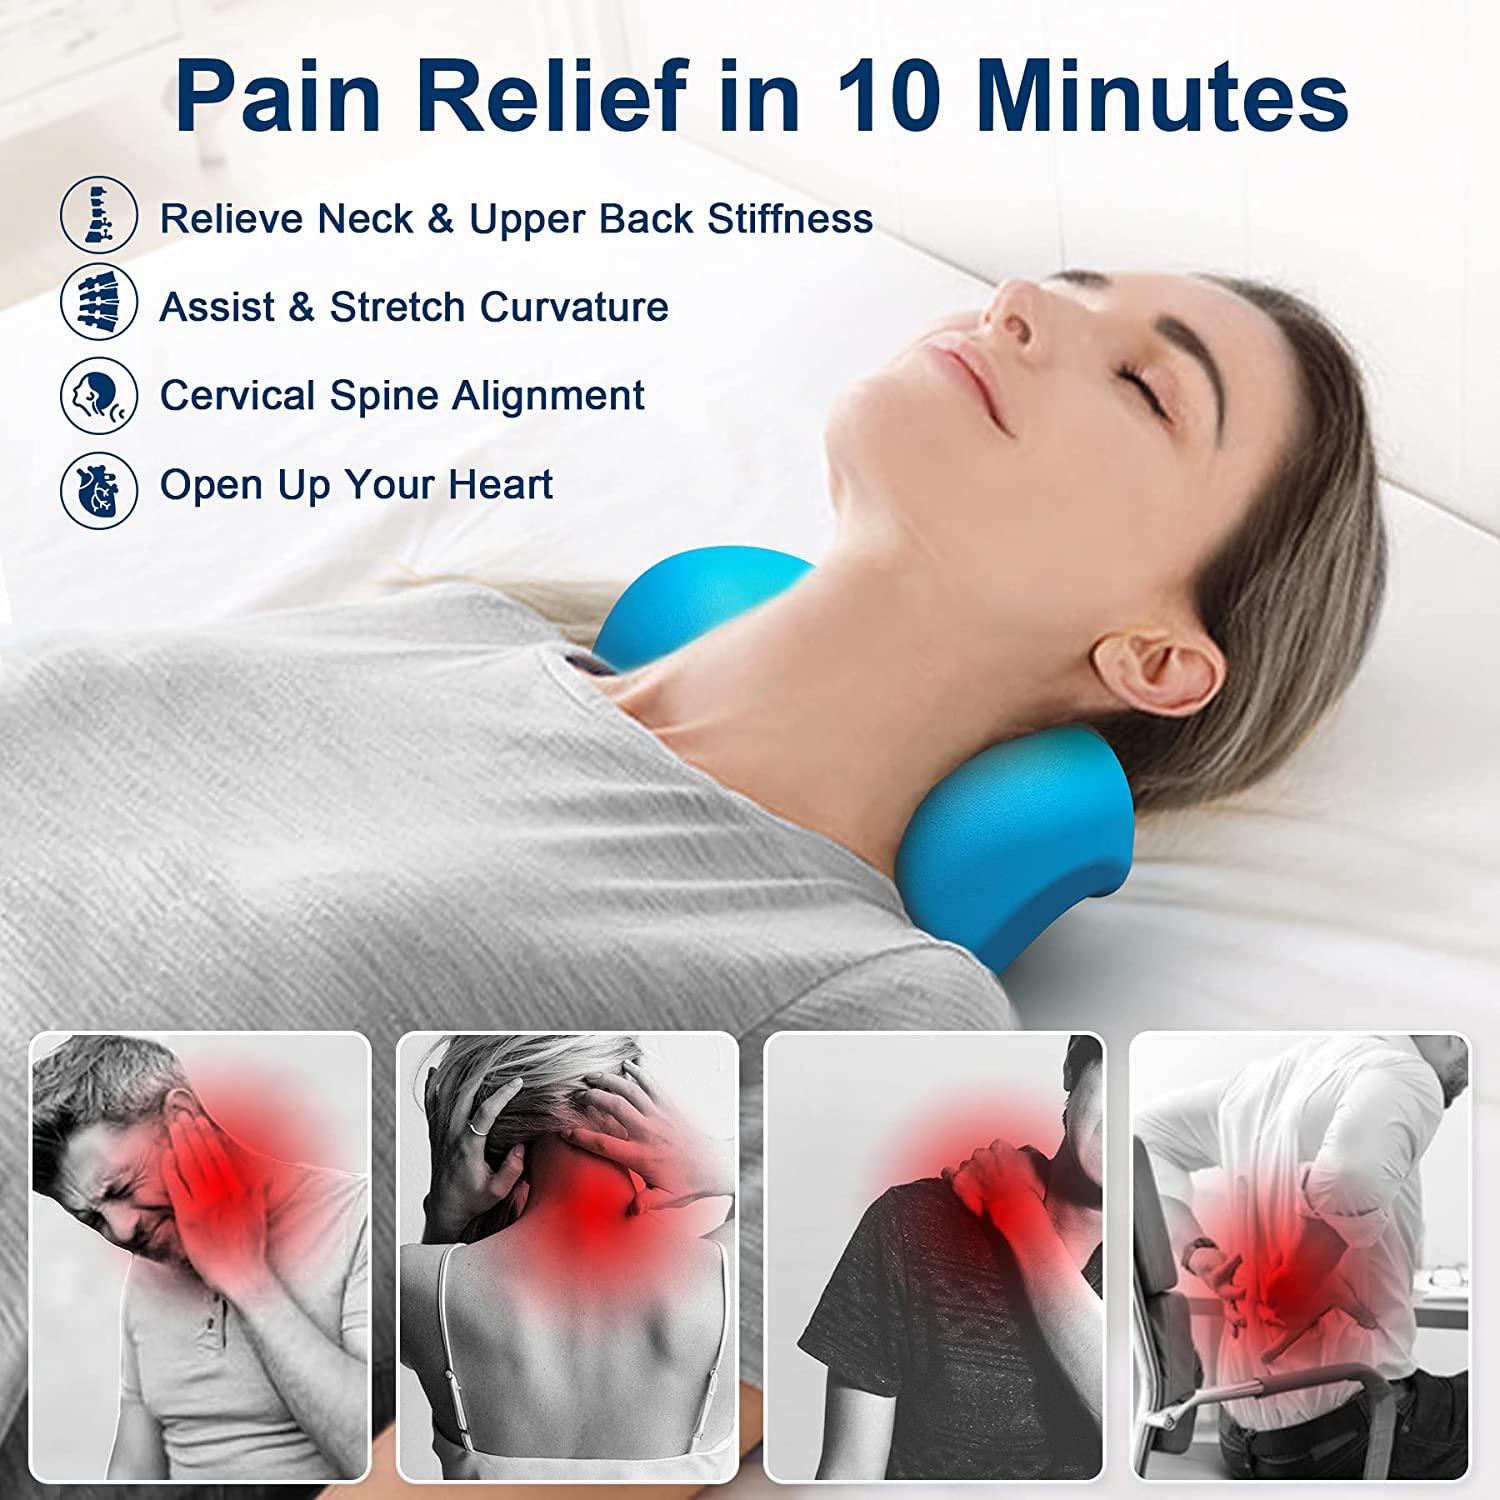 Relief Guaranteed: Massage for Neck & Shoulder Pain